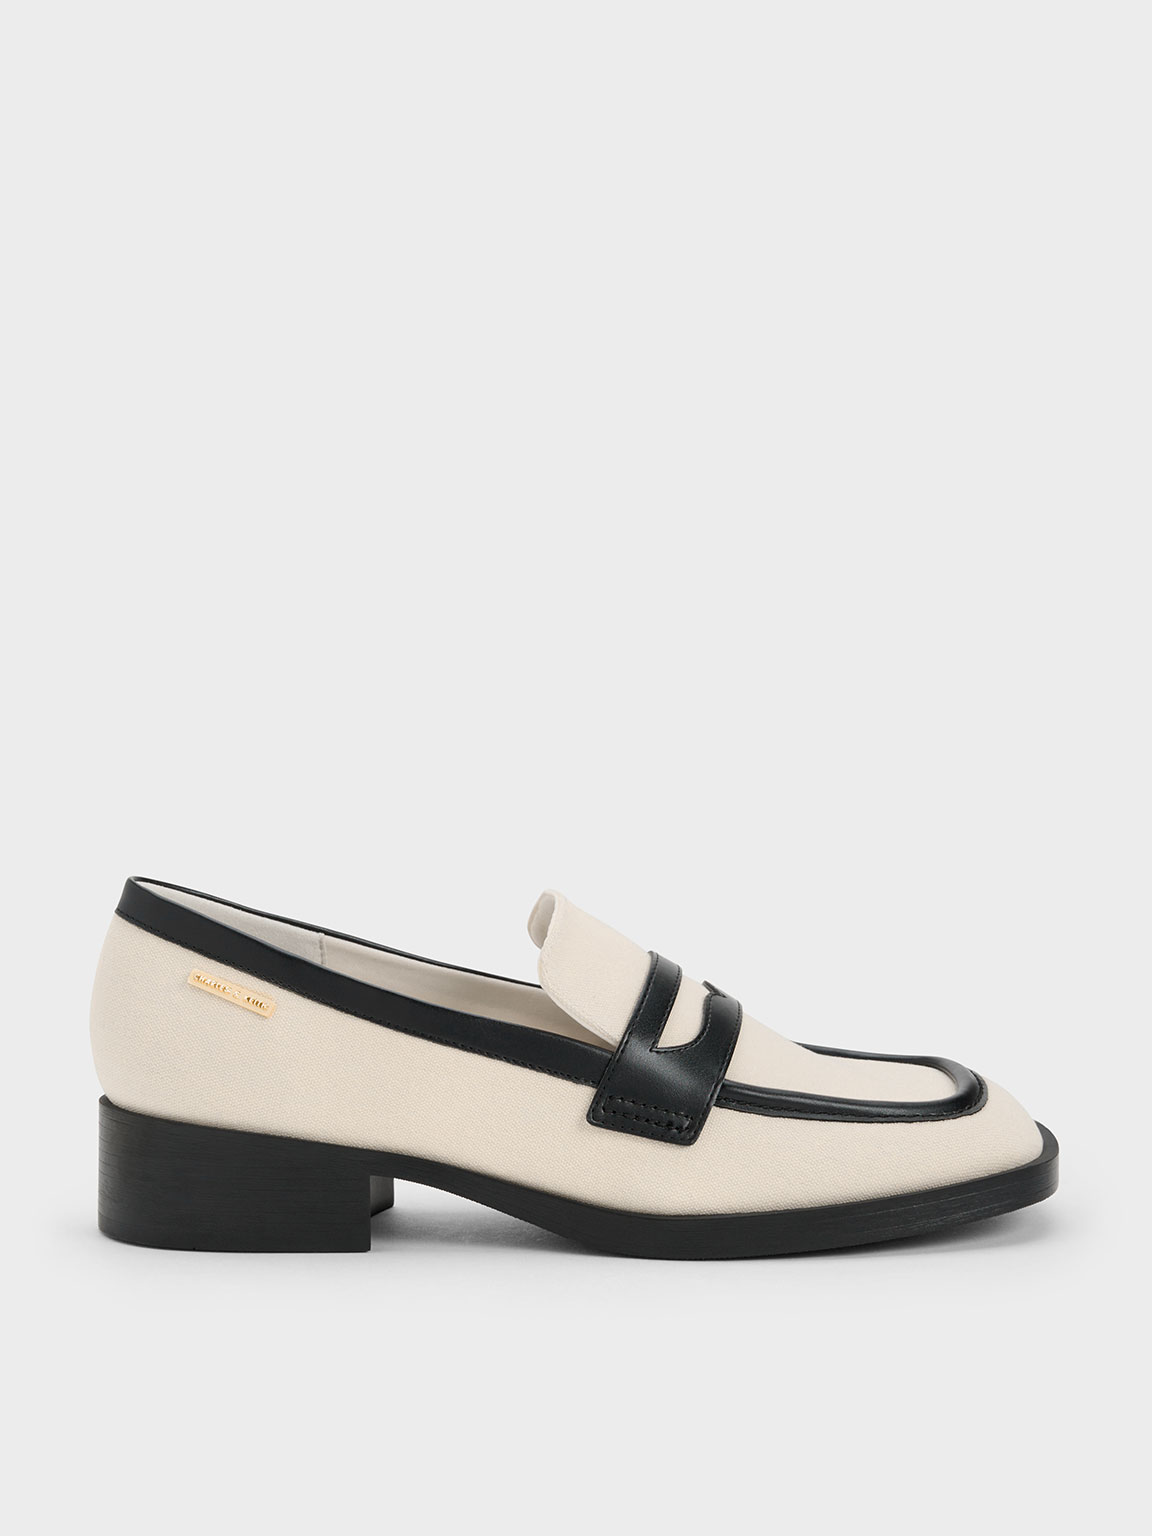 Charles & Keith Canvas Cut-out Penny Loafers In Black Textured